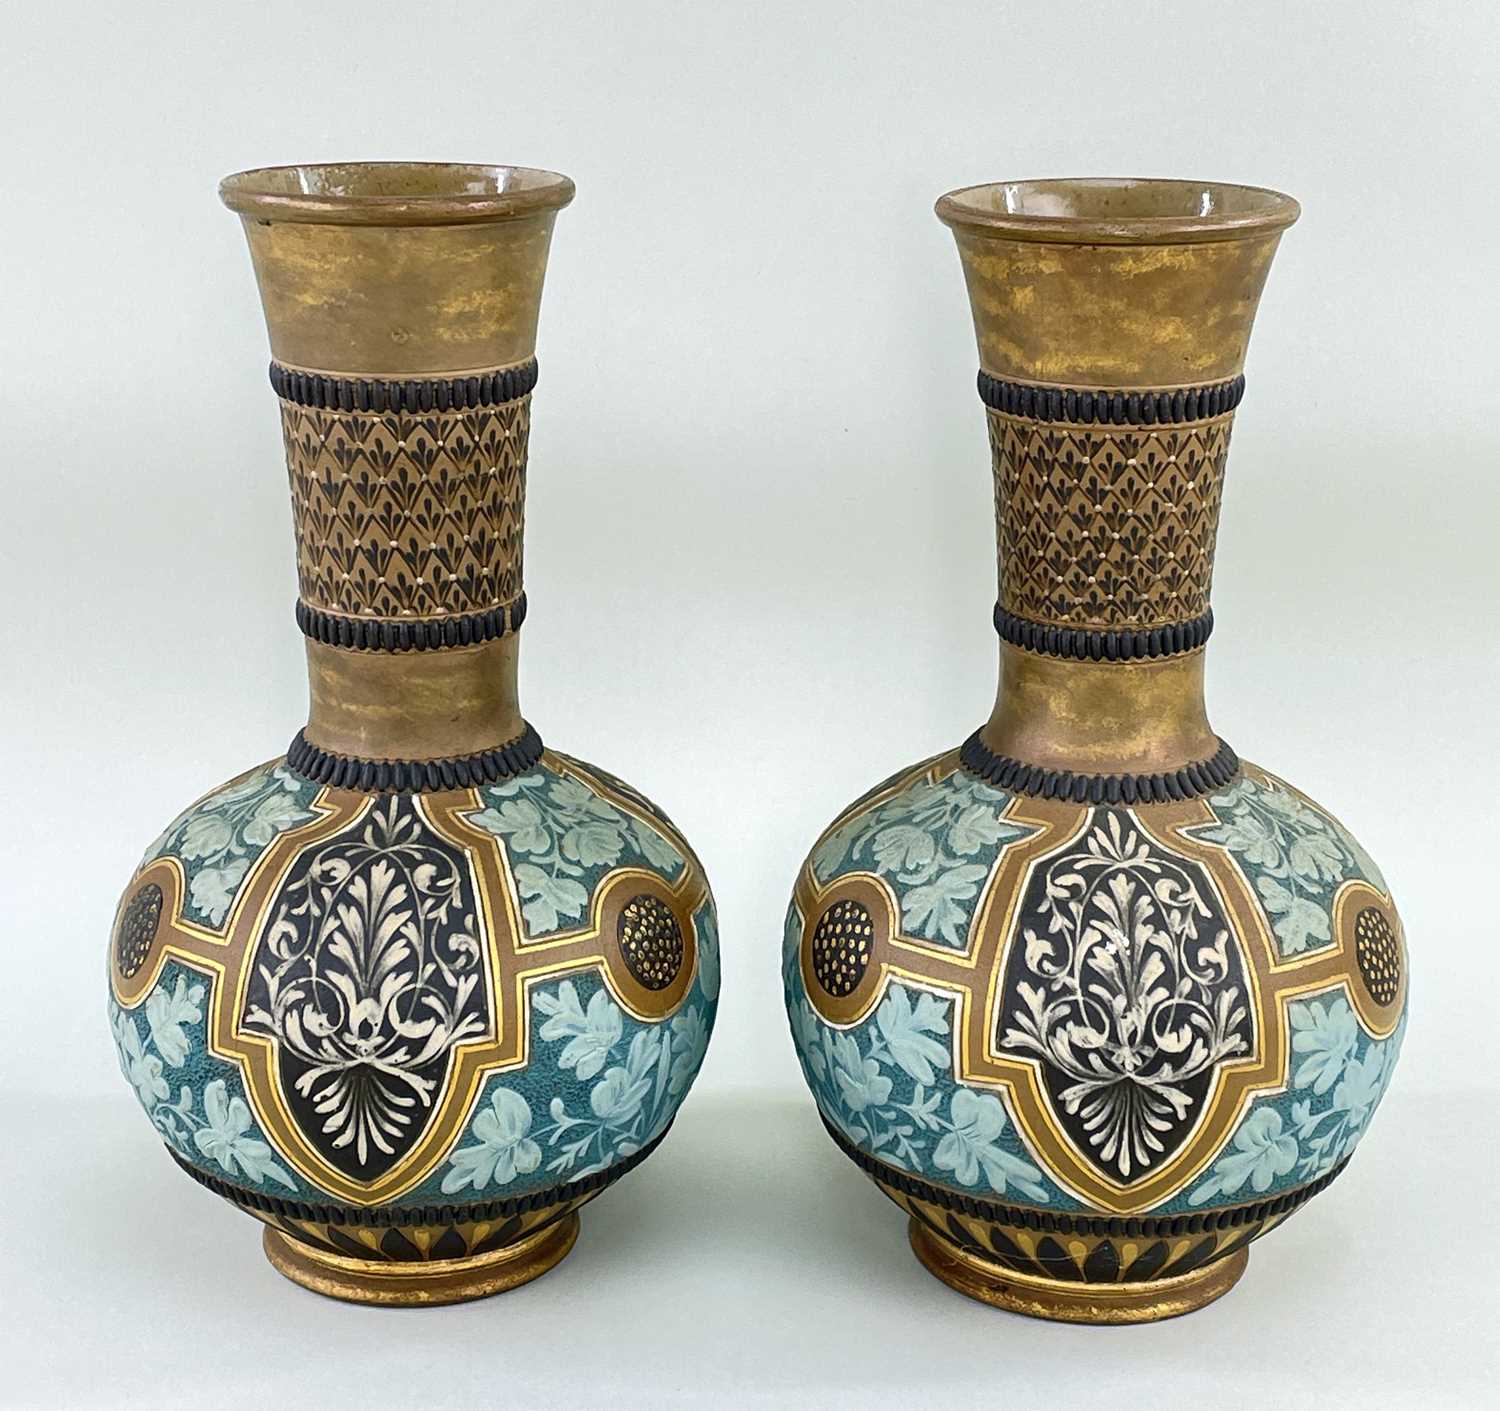 PAIR OF DOULTON SILICON WARE VASES, globular shape with foliate decoration, incised initials 'MMR'